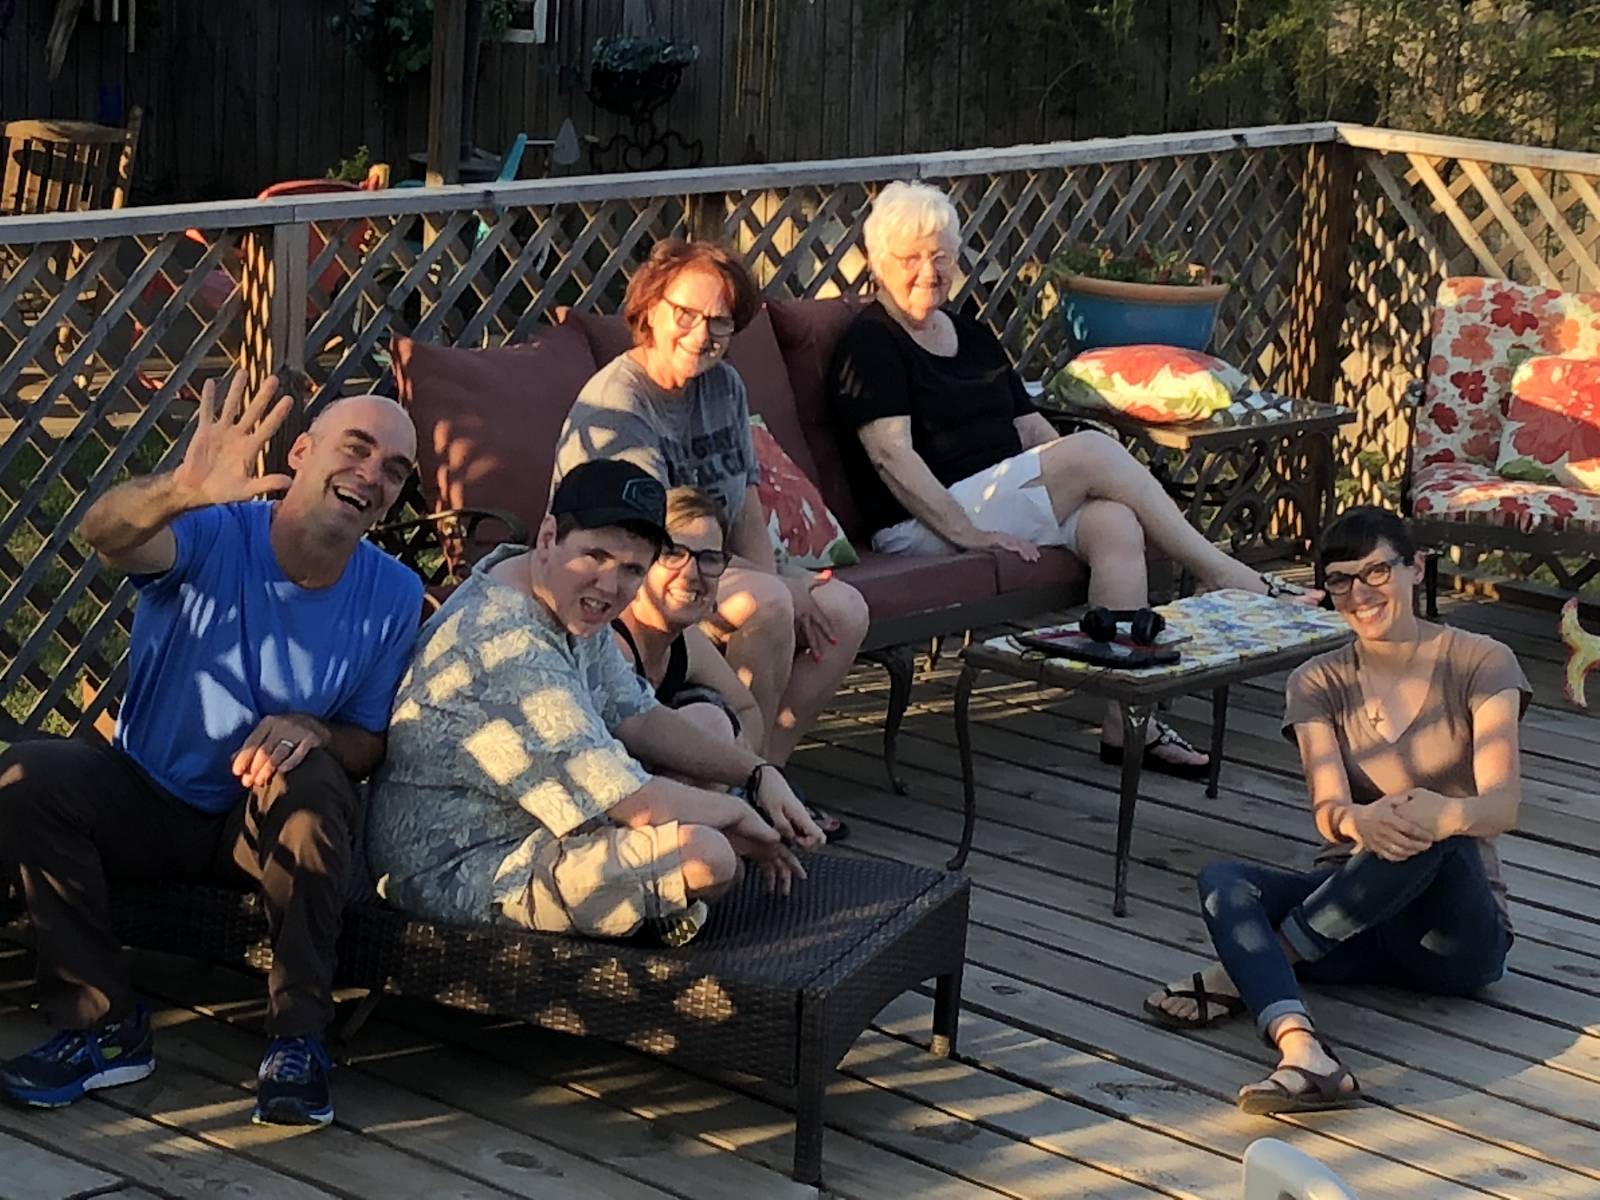 Six people sitting on lawn chairs outside and smiling. One person is waving to the camera.